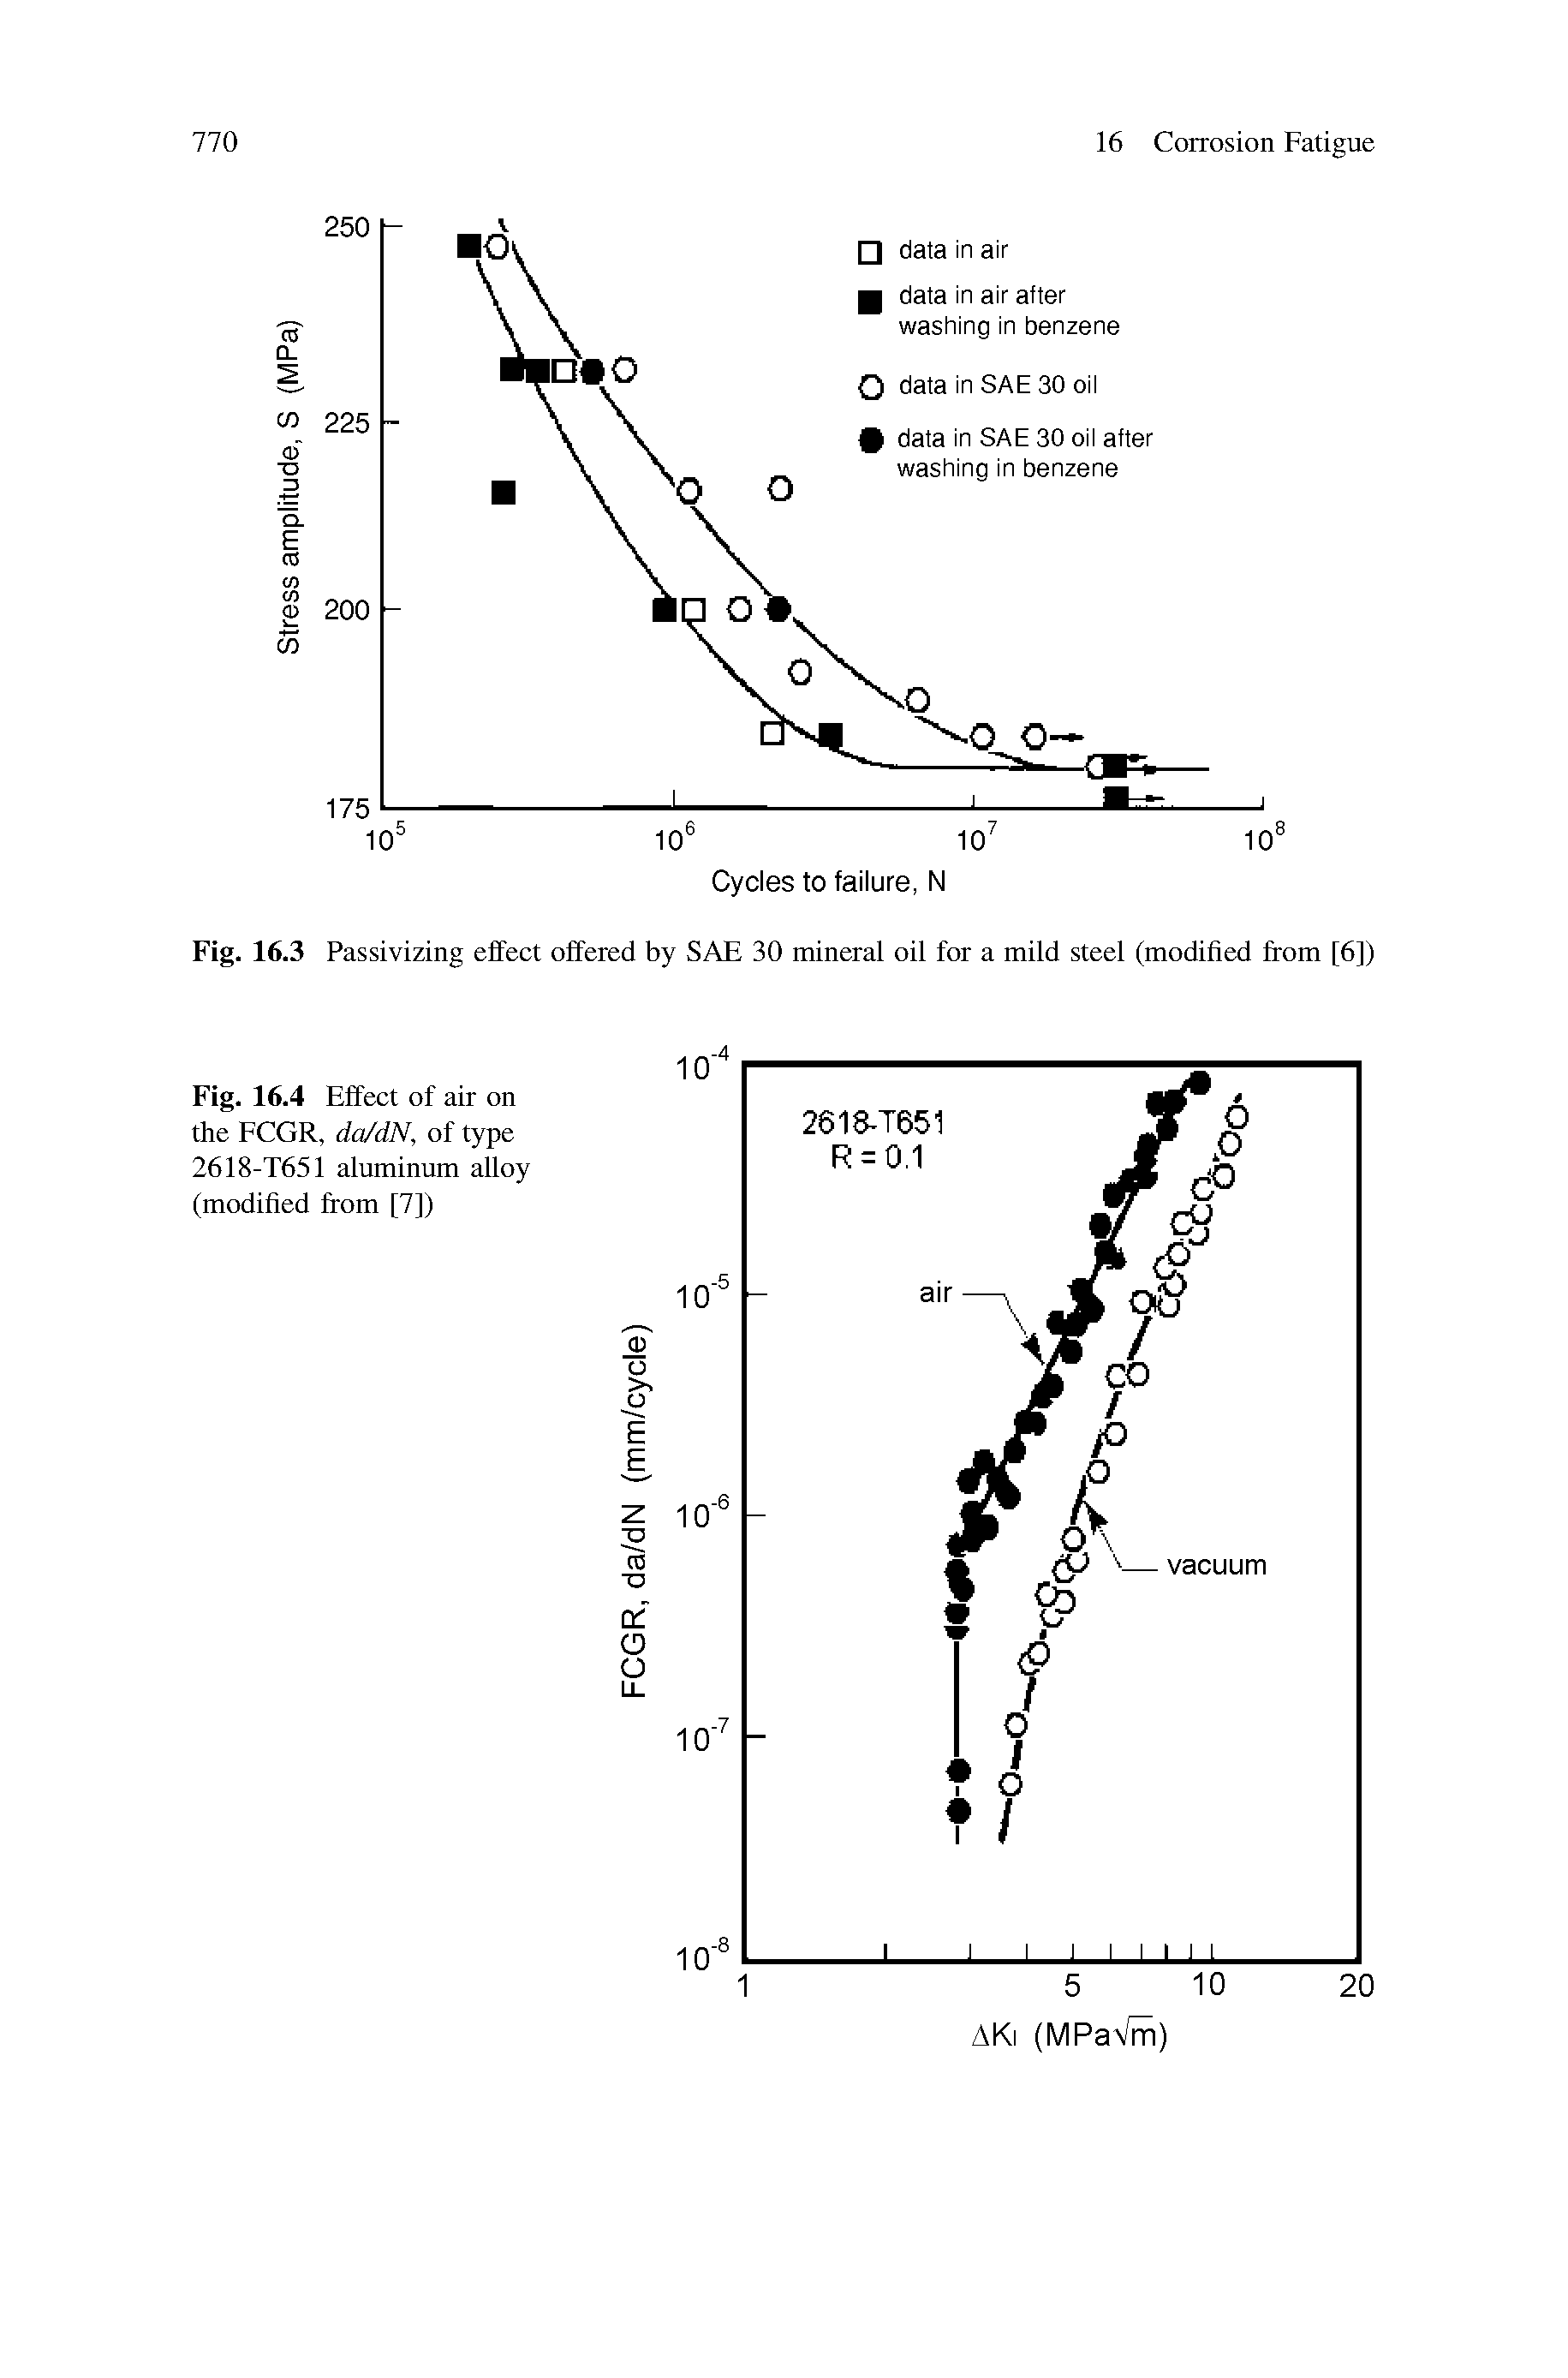 Fig. 16.4 Effect of air on the ECGR, da/dN, of type 2618-T651 aluminum alloy (modified from [7])...